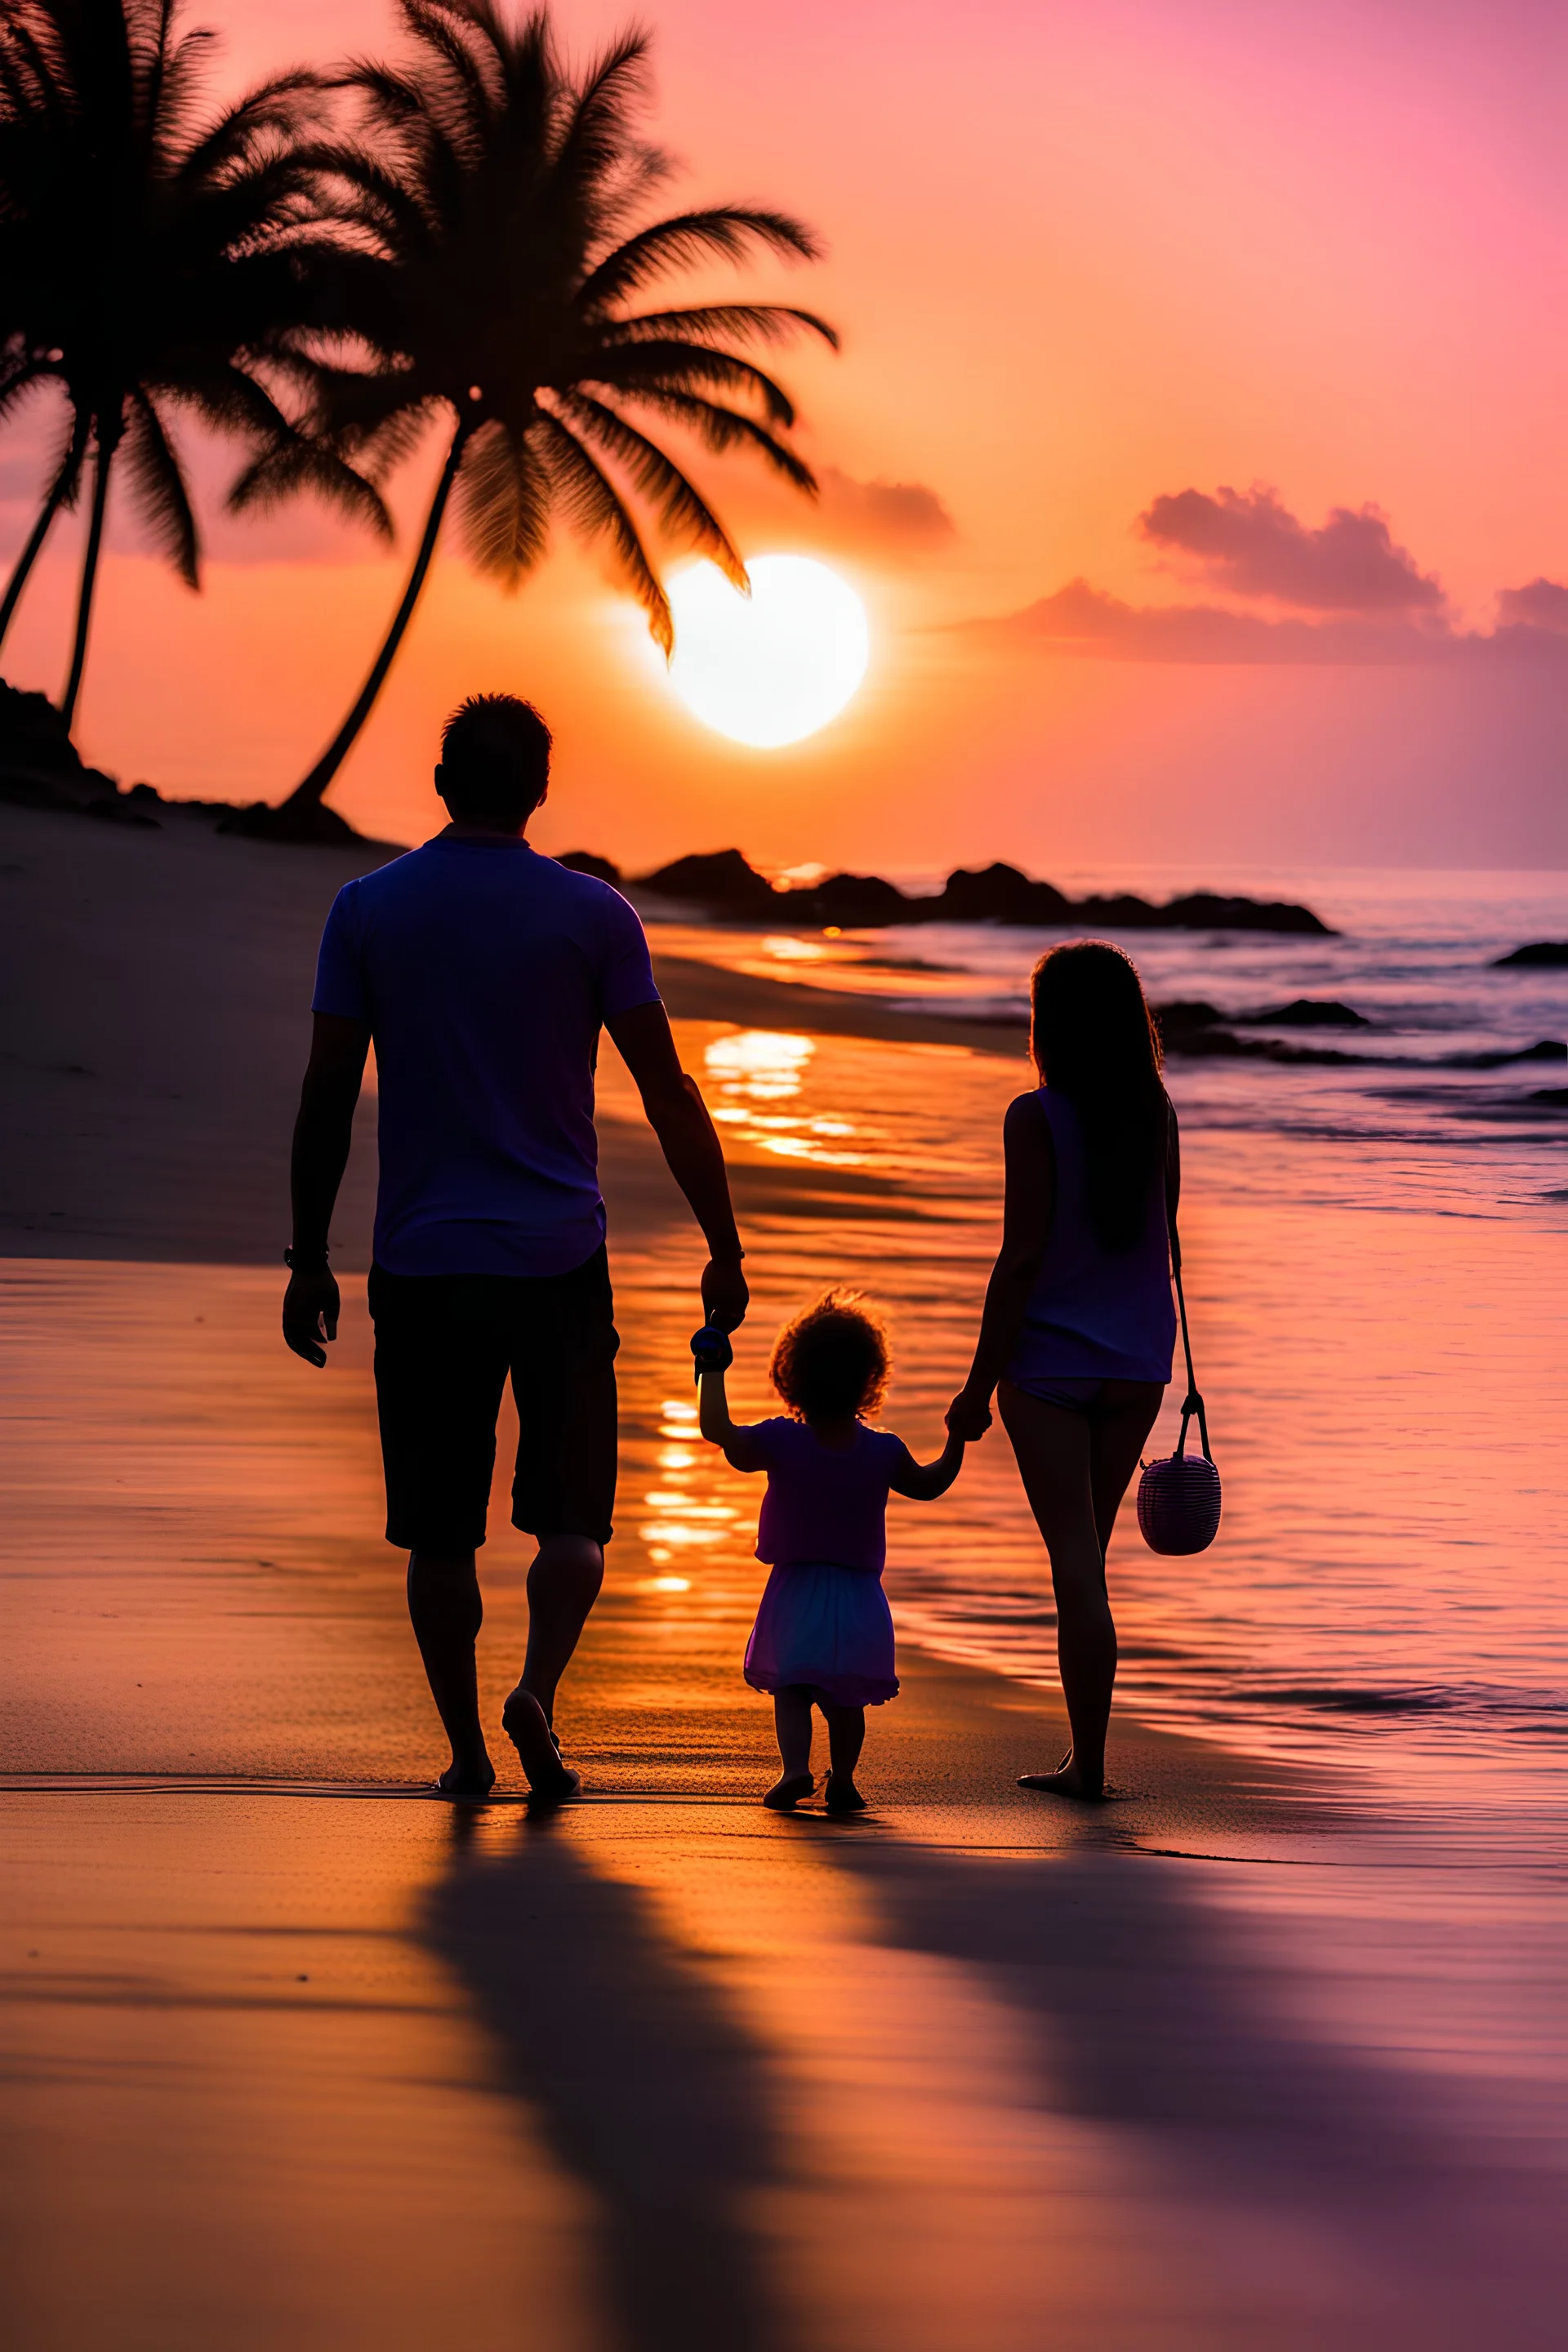 Mom 180cm, dad 180cm and 2year old daughter 90 cm watching the purple blue sunset with the sun super low in the sky. Silhouette from behind on the beach standing on the sand. Make the man Taiwanese and the woman Hispanic